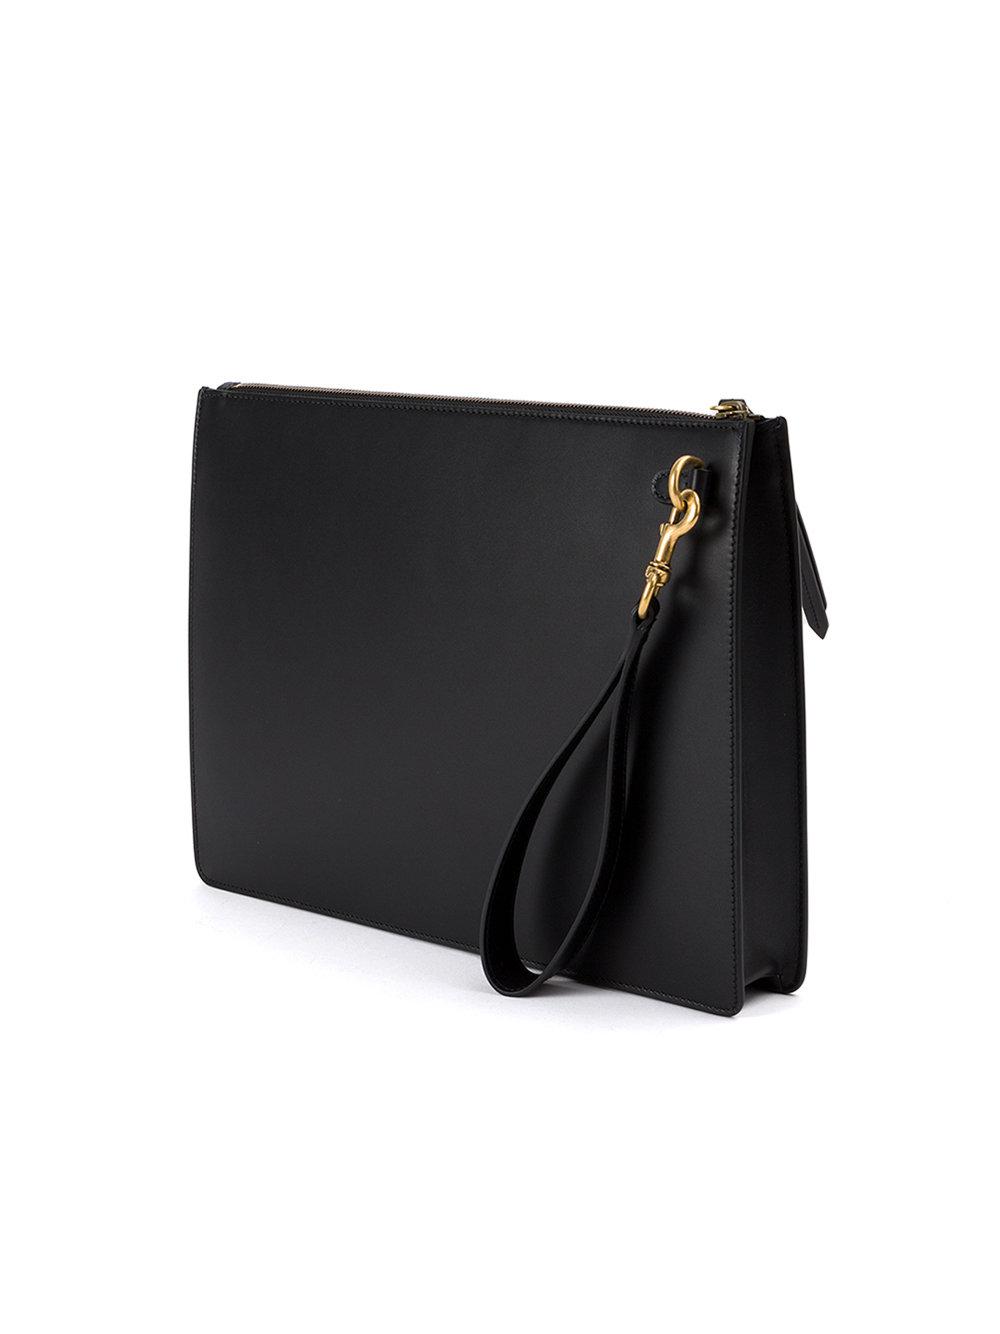 Gucci Leather Oversized Clutch Bag in Black for Men - Lyst